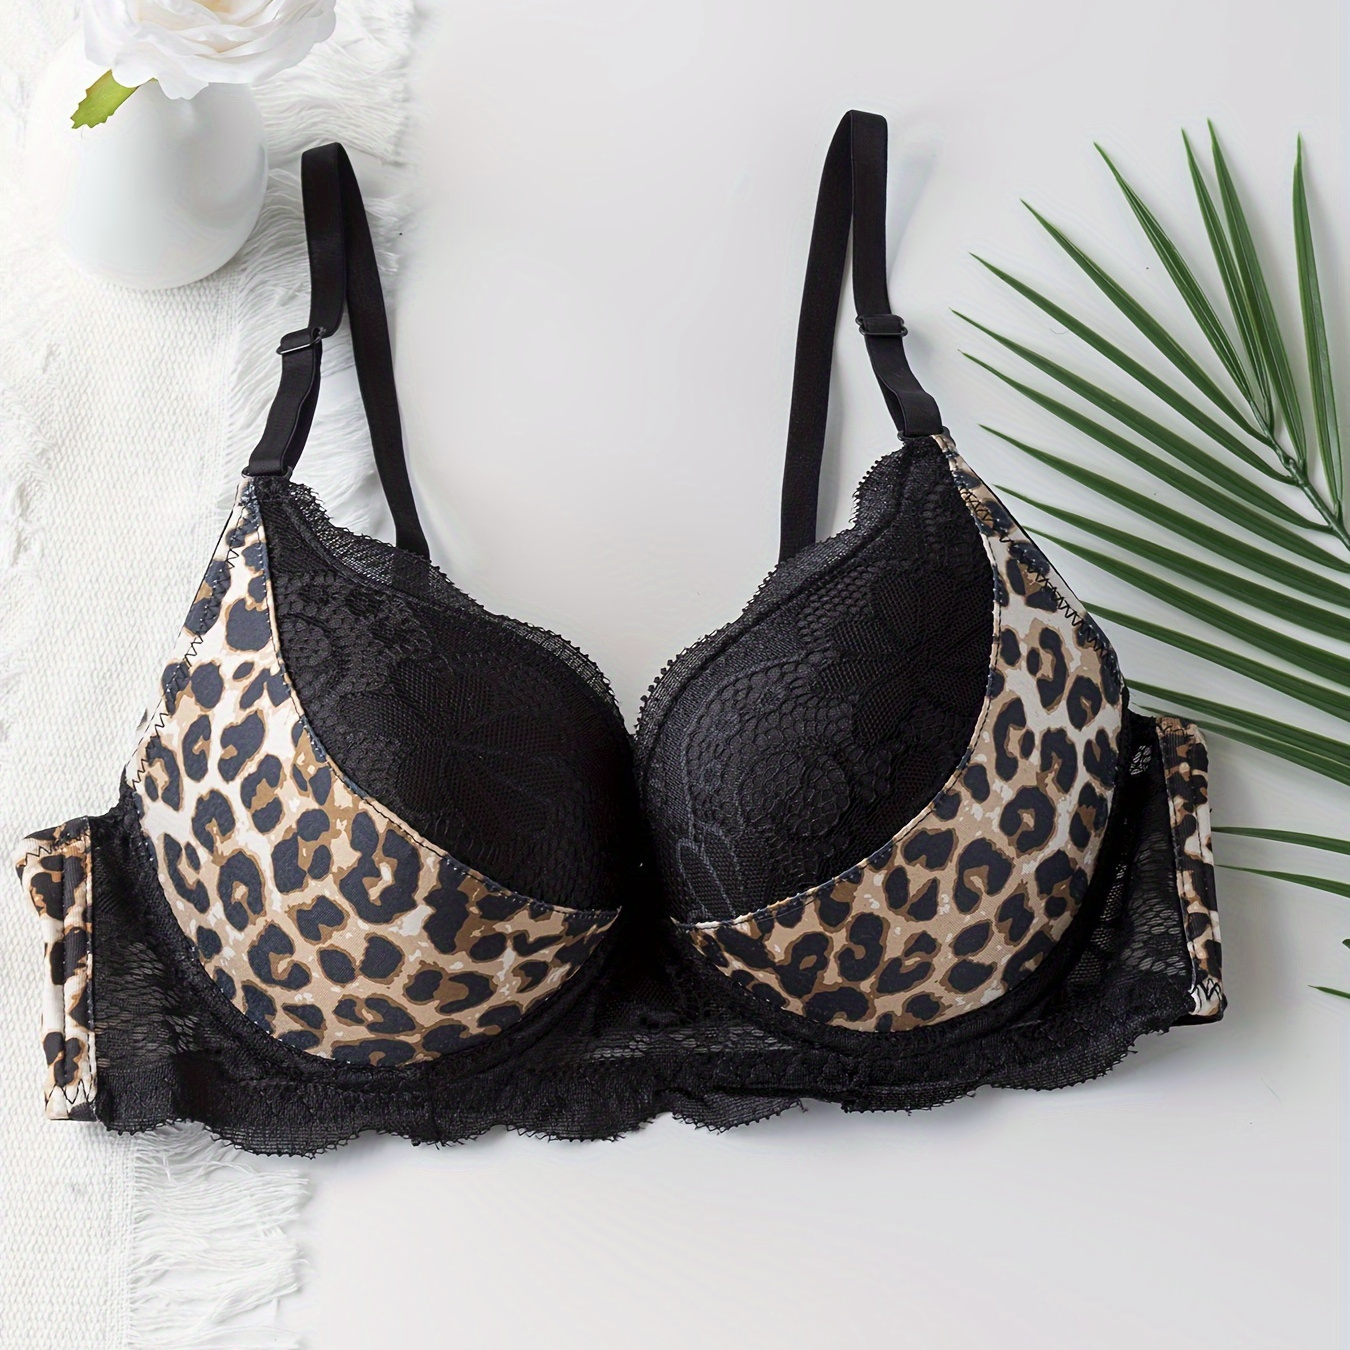 

Leopard Print Lace Push-up Bra With Underwire, Sexy Fashion Lingerie For Women, Mature Style, Adjustable Straps